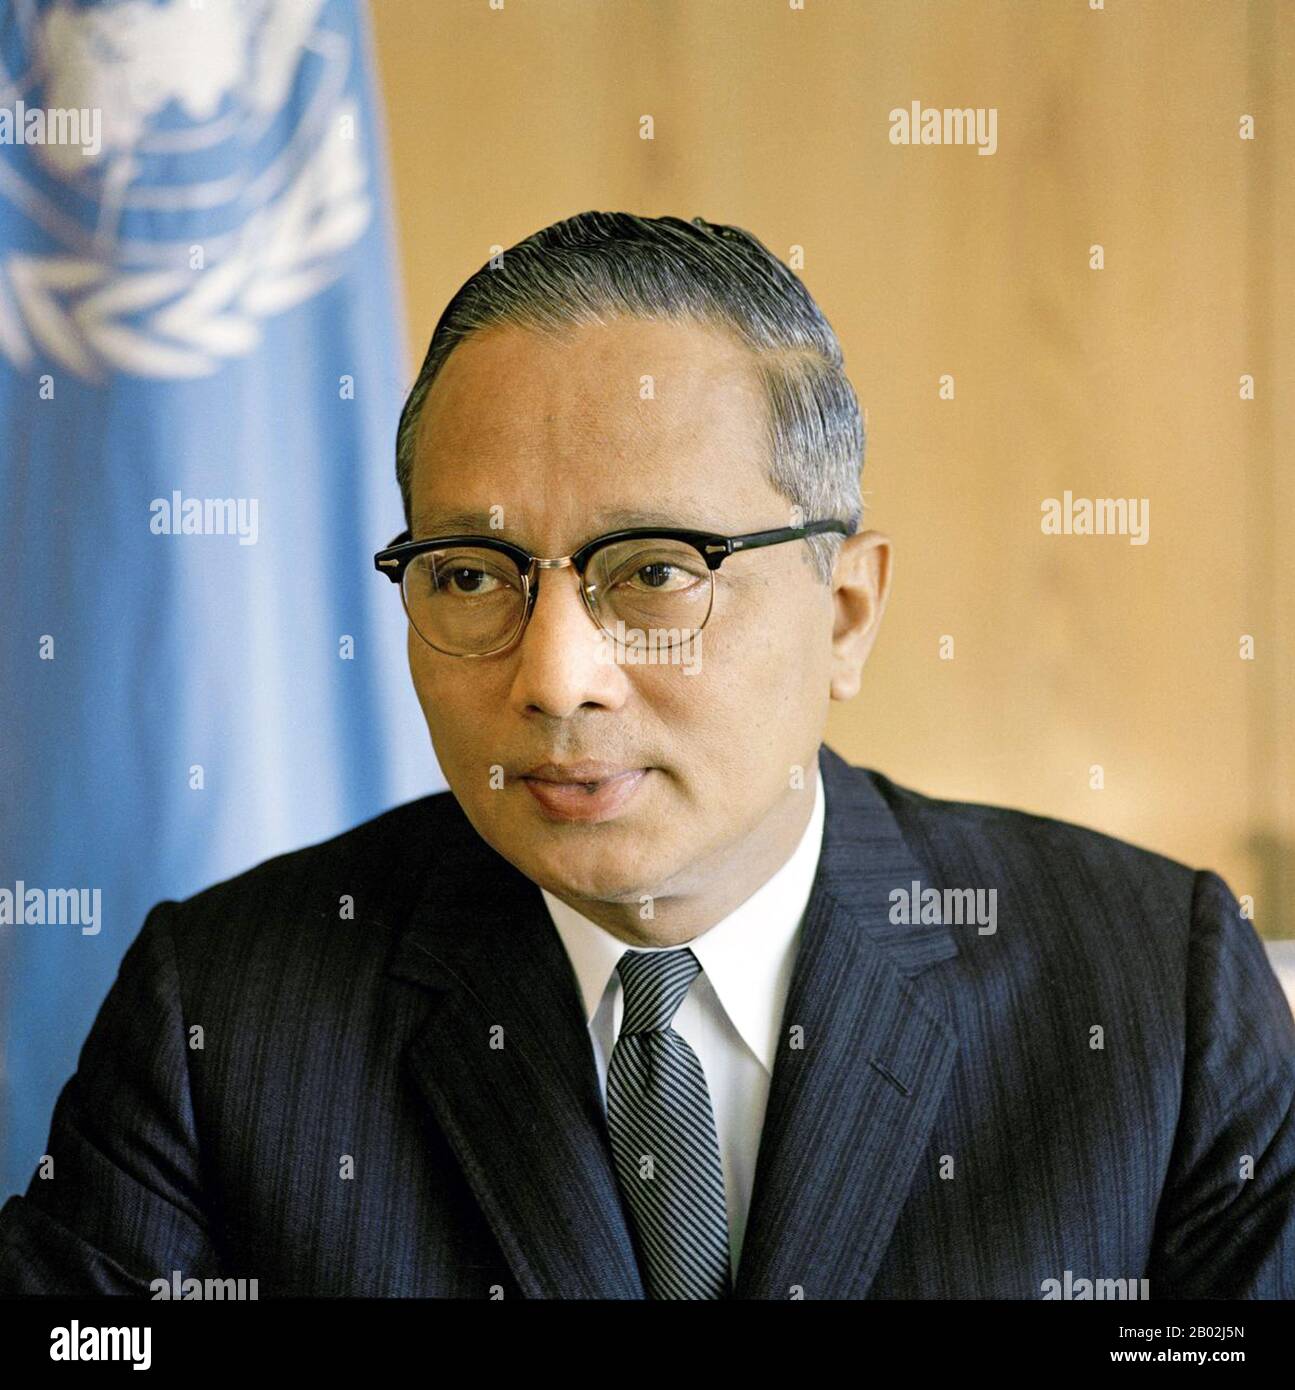 U Thant ( January 22, 1909 – November 25, 1974) was a Burmese diplomat and the third Secretary-General of the United Nations from 1961 to 1971.  A native of Pantanaw, Thant was educated at the National High School and at Rangoon University. In the days of tense political climate in Burma, he held moderate views positioning himself between fervent nationalists and British loyalists. He was a close friend of Burma's first Prime Minister U Nu and served various positions in Nu's cabinet from 1948 to 1961.  He was appointed as Secretary-General in 1961 when his predecessor, Dag Hammarskjöld died i Stock Photo